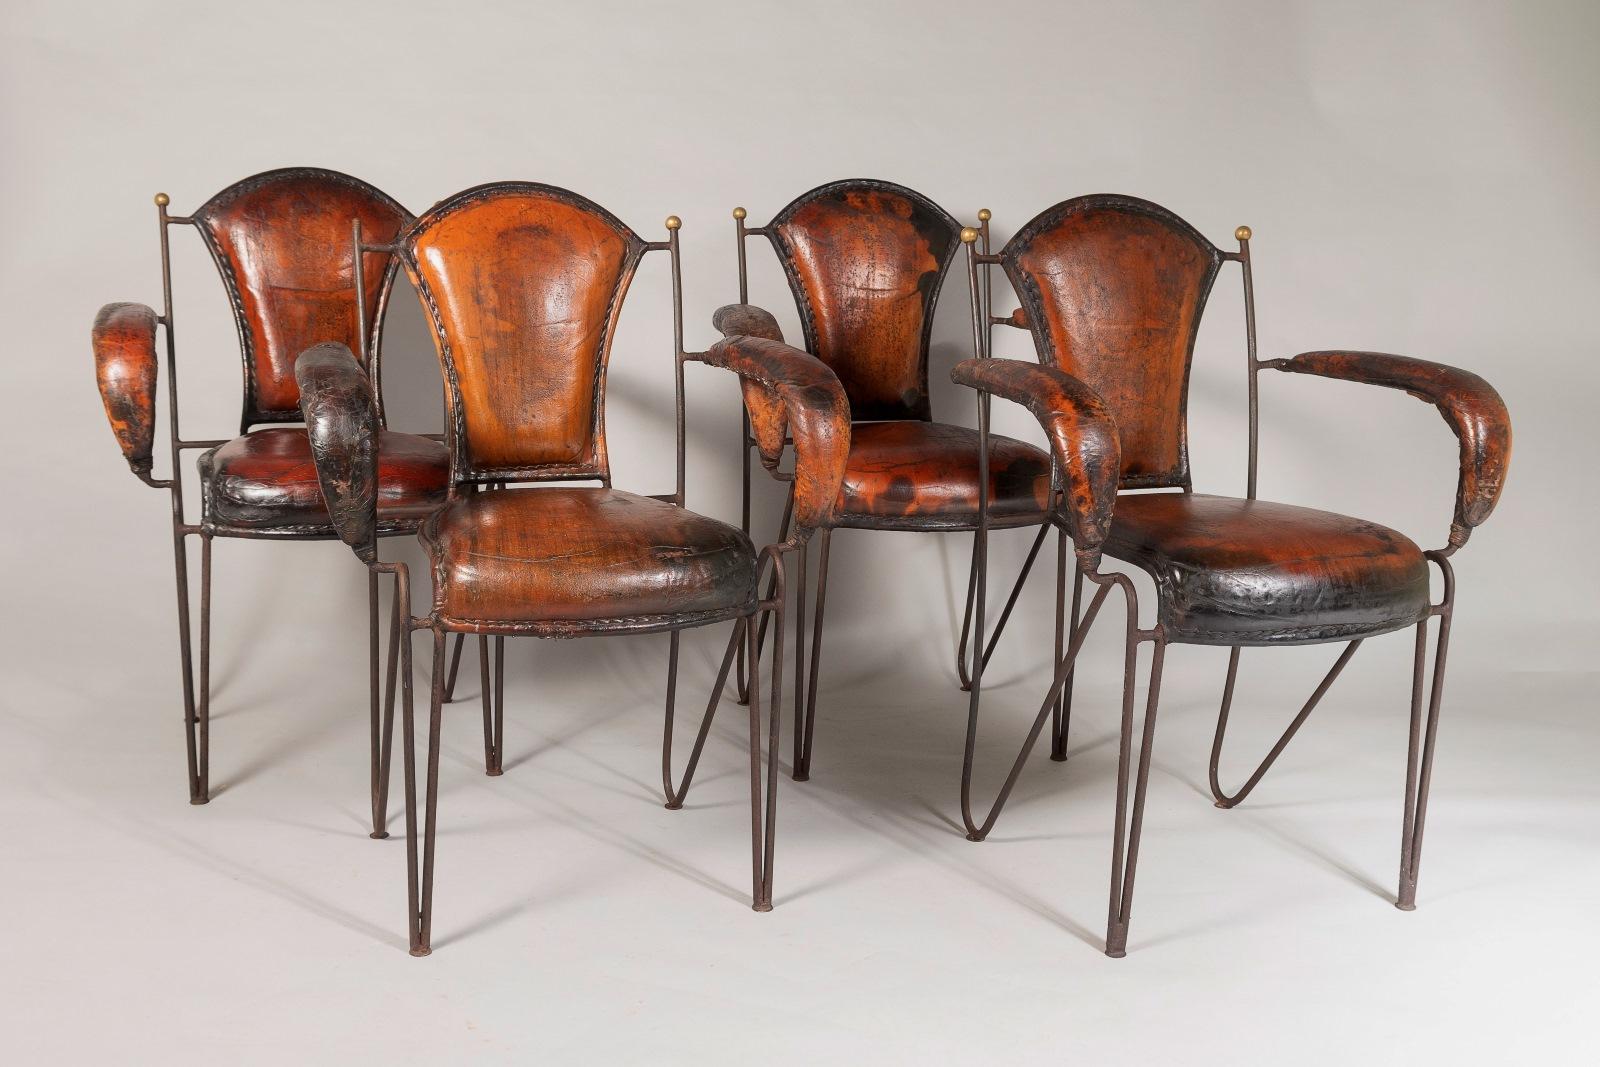 A set of four designer chairs by Jacques Adnet, heavy iron frame and leather stitched armchairs.
Adnet was an Art Deco modernist designer and although these Chairs were designed later in his career, they still have an Art Deco feel to them and a